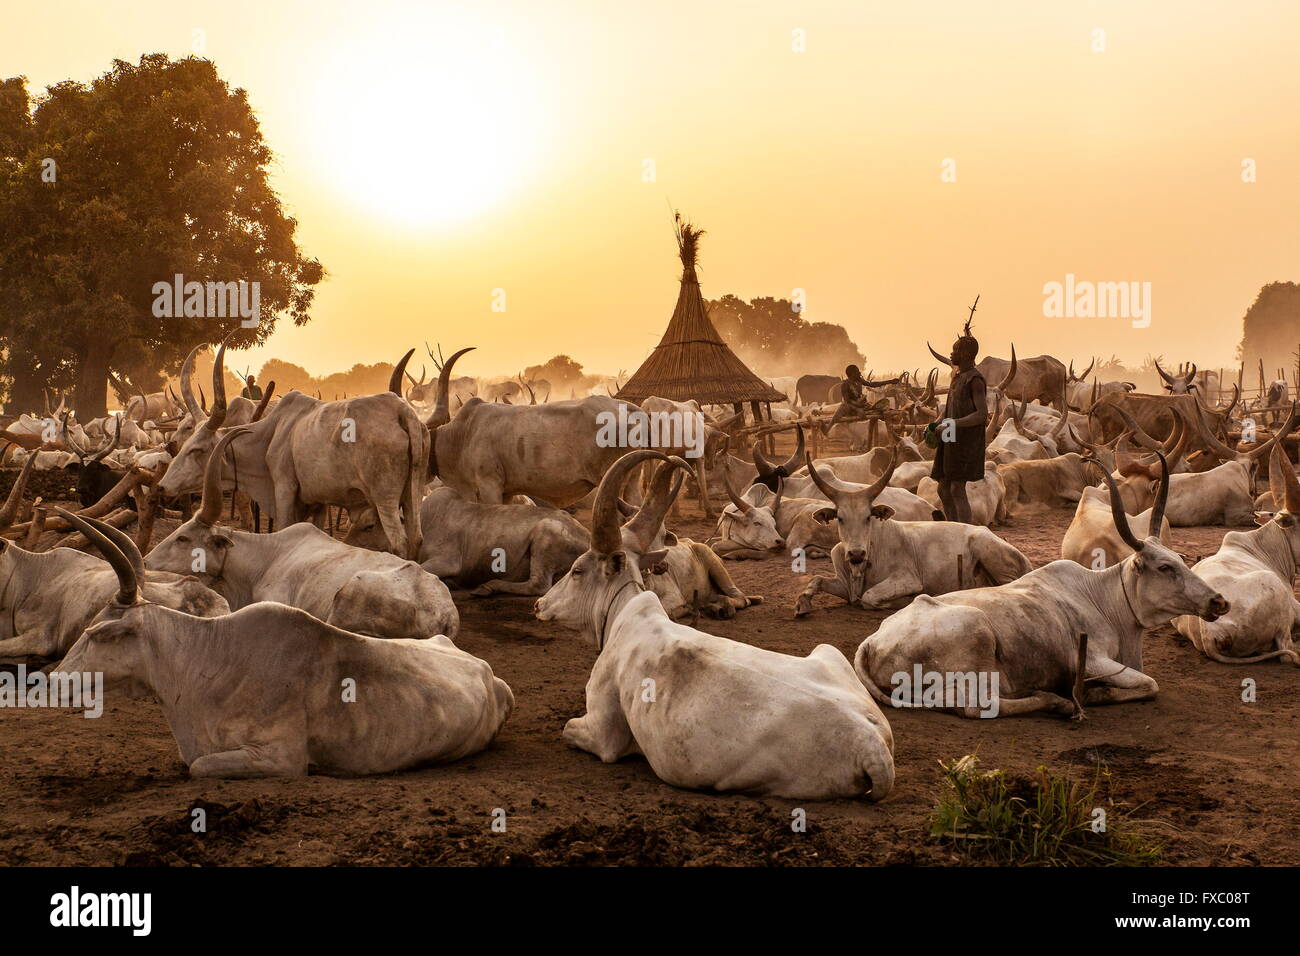 South Sudan. 23rd Feb, 2016. The animals return to the camp around sunset. Ankole-Watusi, also known as Ankole Longhorn, or 'Cattle of Kings' is a 900 to 1,600 pound landrace breed of cattle originally native to Africa with distinctive horns that can reach up to 8 ft tall. © Tariq Zaidi/ZUMA Wire/ZUMAPRESS.com/Alamy Live News Stock Photo